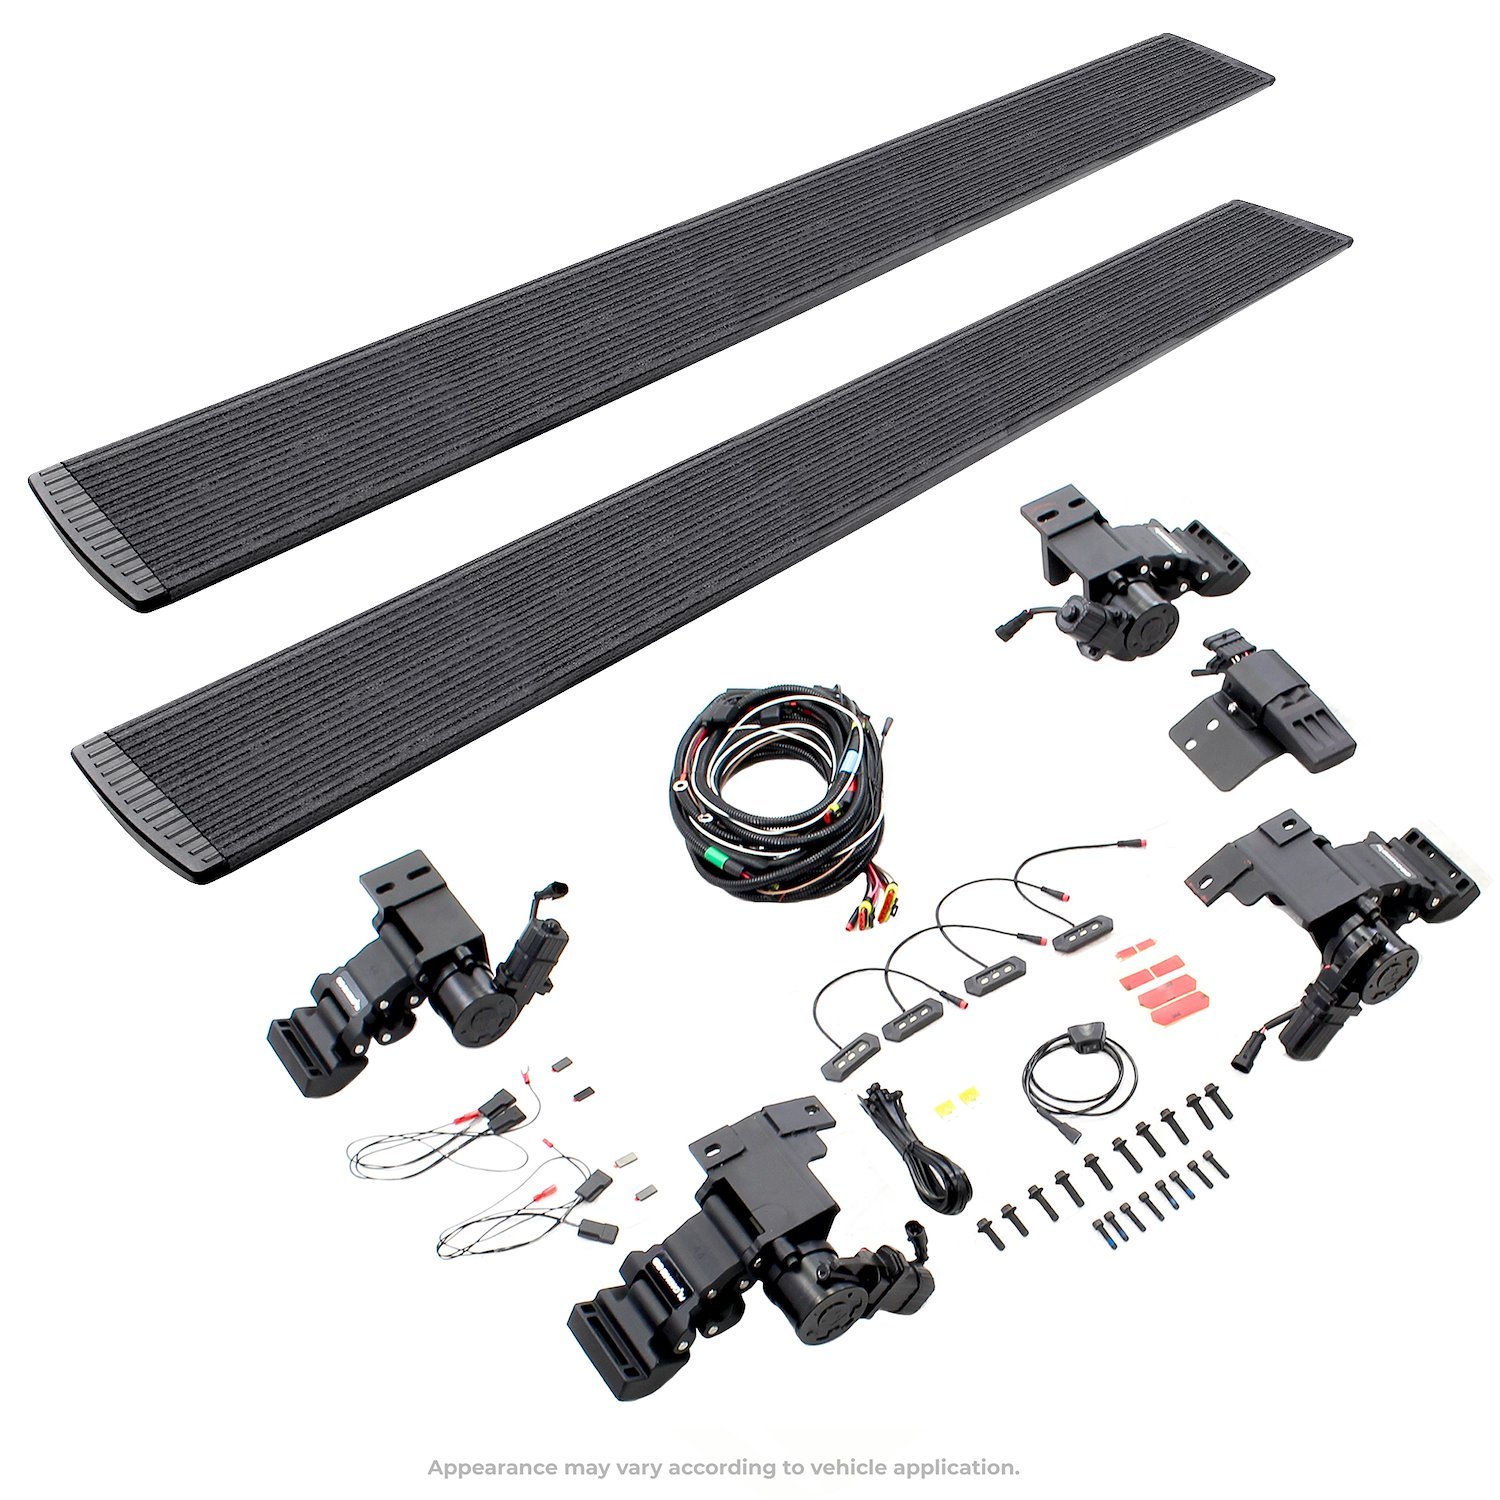 E1 Electric Running Board Kit Fits Select Ford